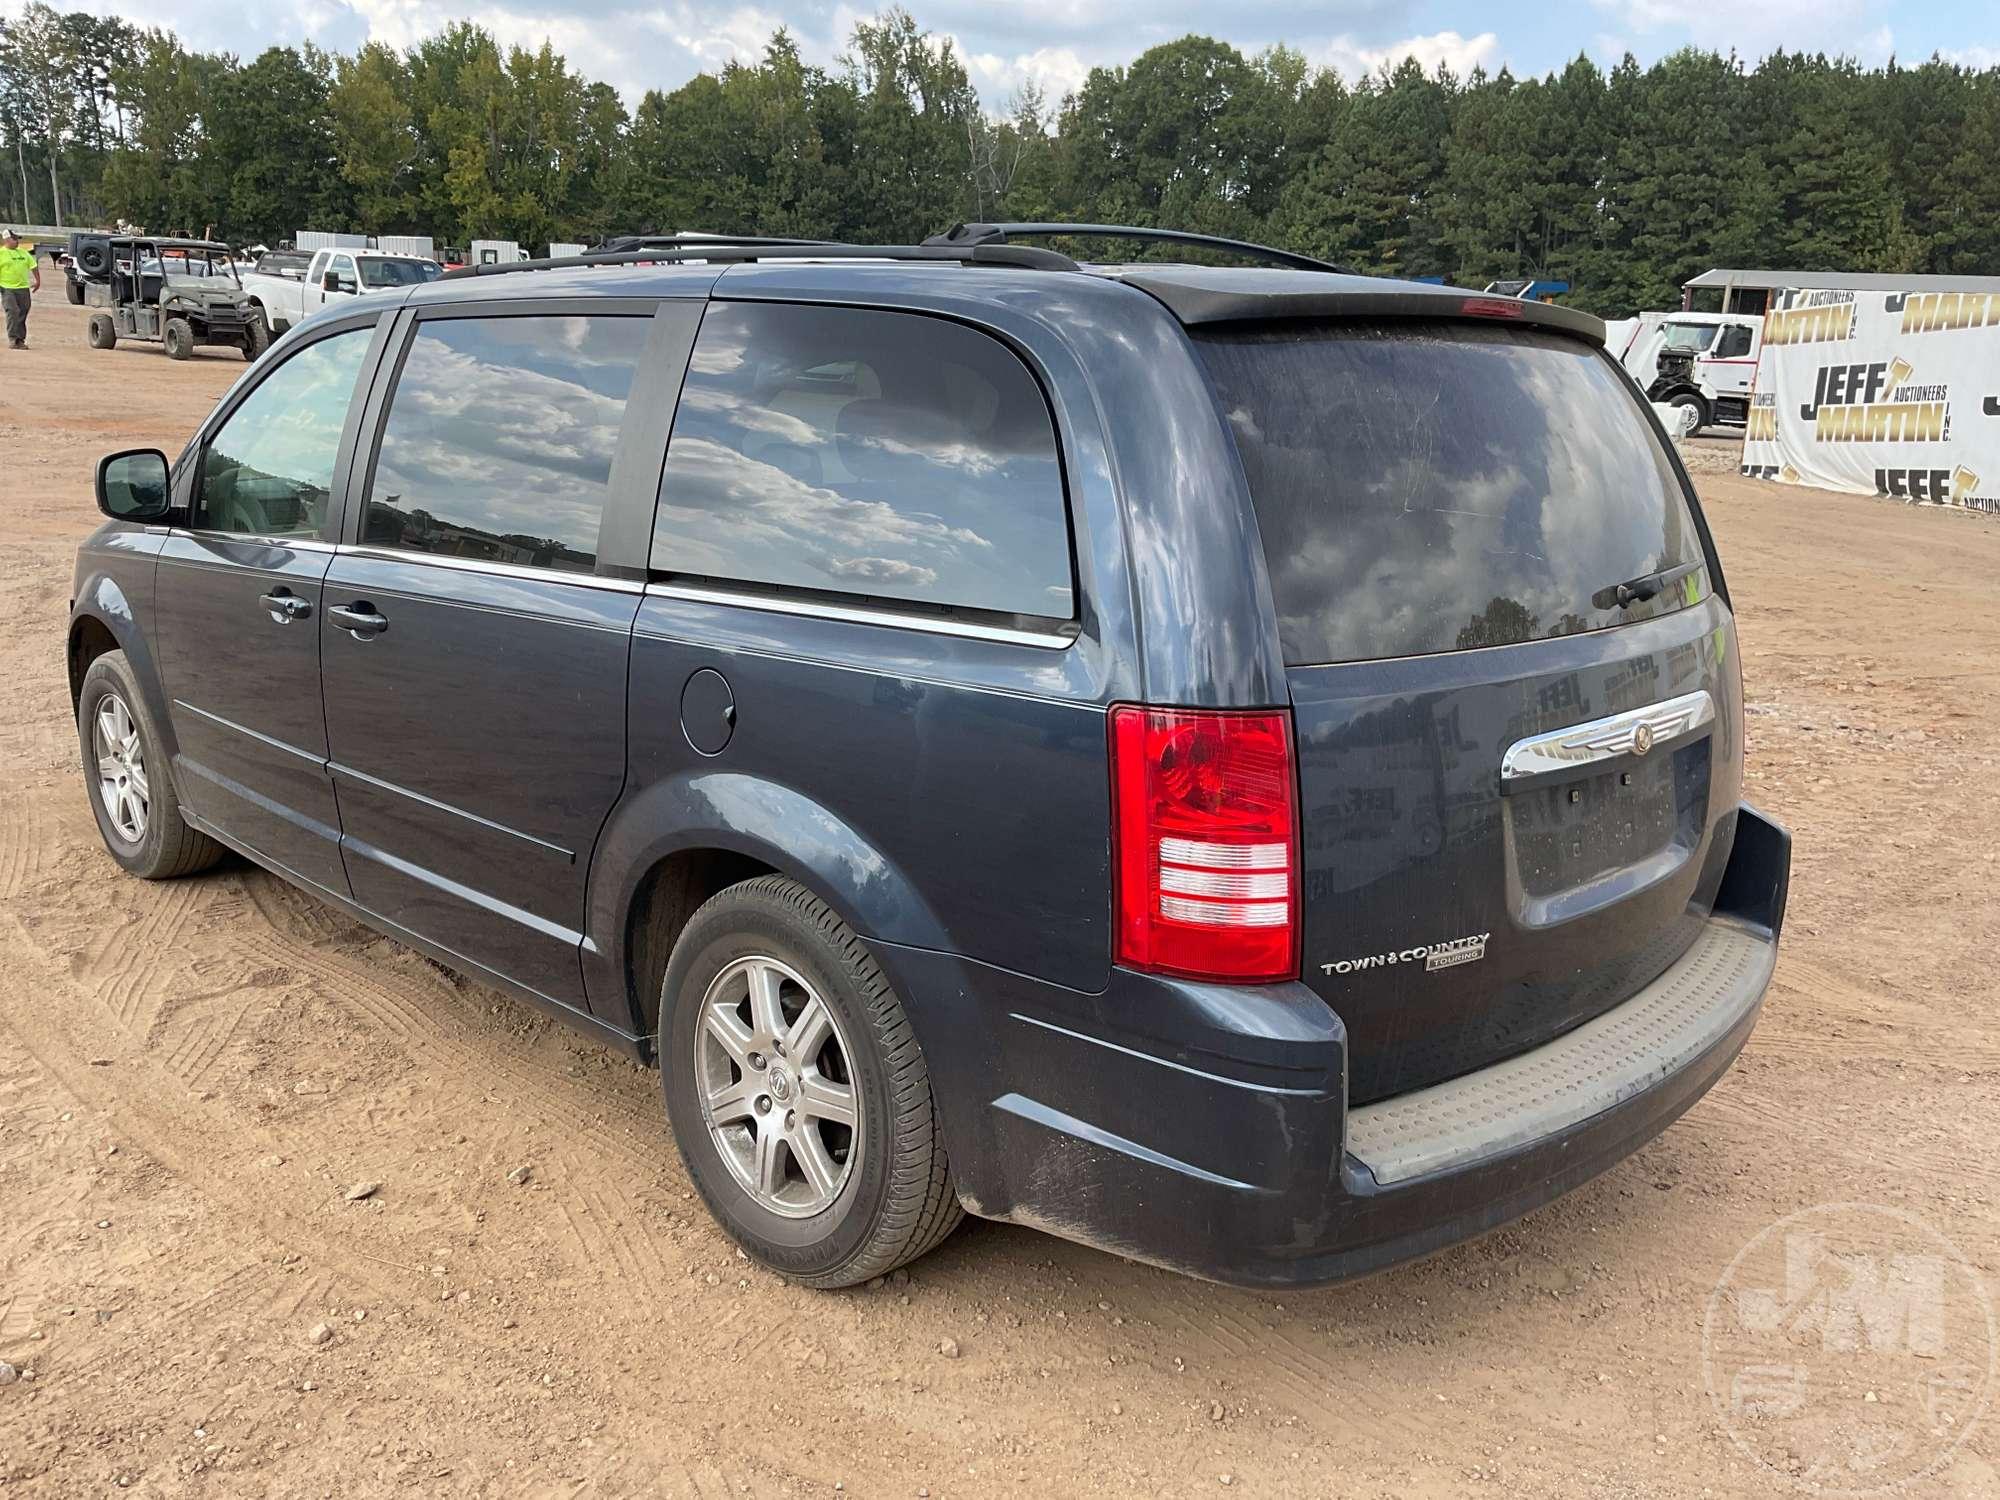 2008 CHRYSLER TOWN AND COUNTRY VIN: 2A8HR54P98R664210